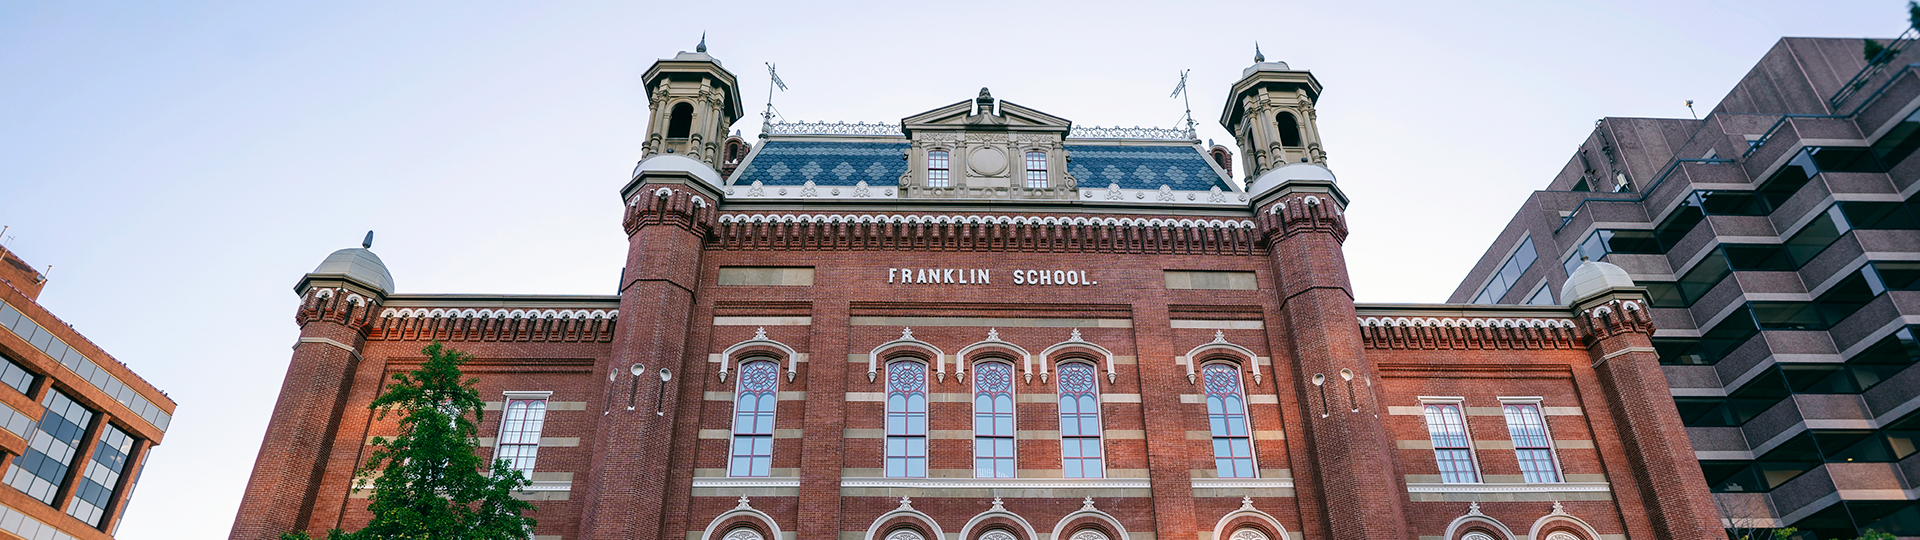 Franklin School, the home of Planet Word museum